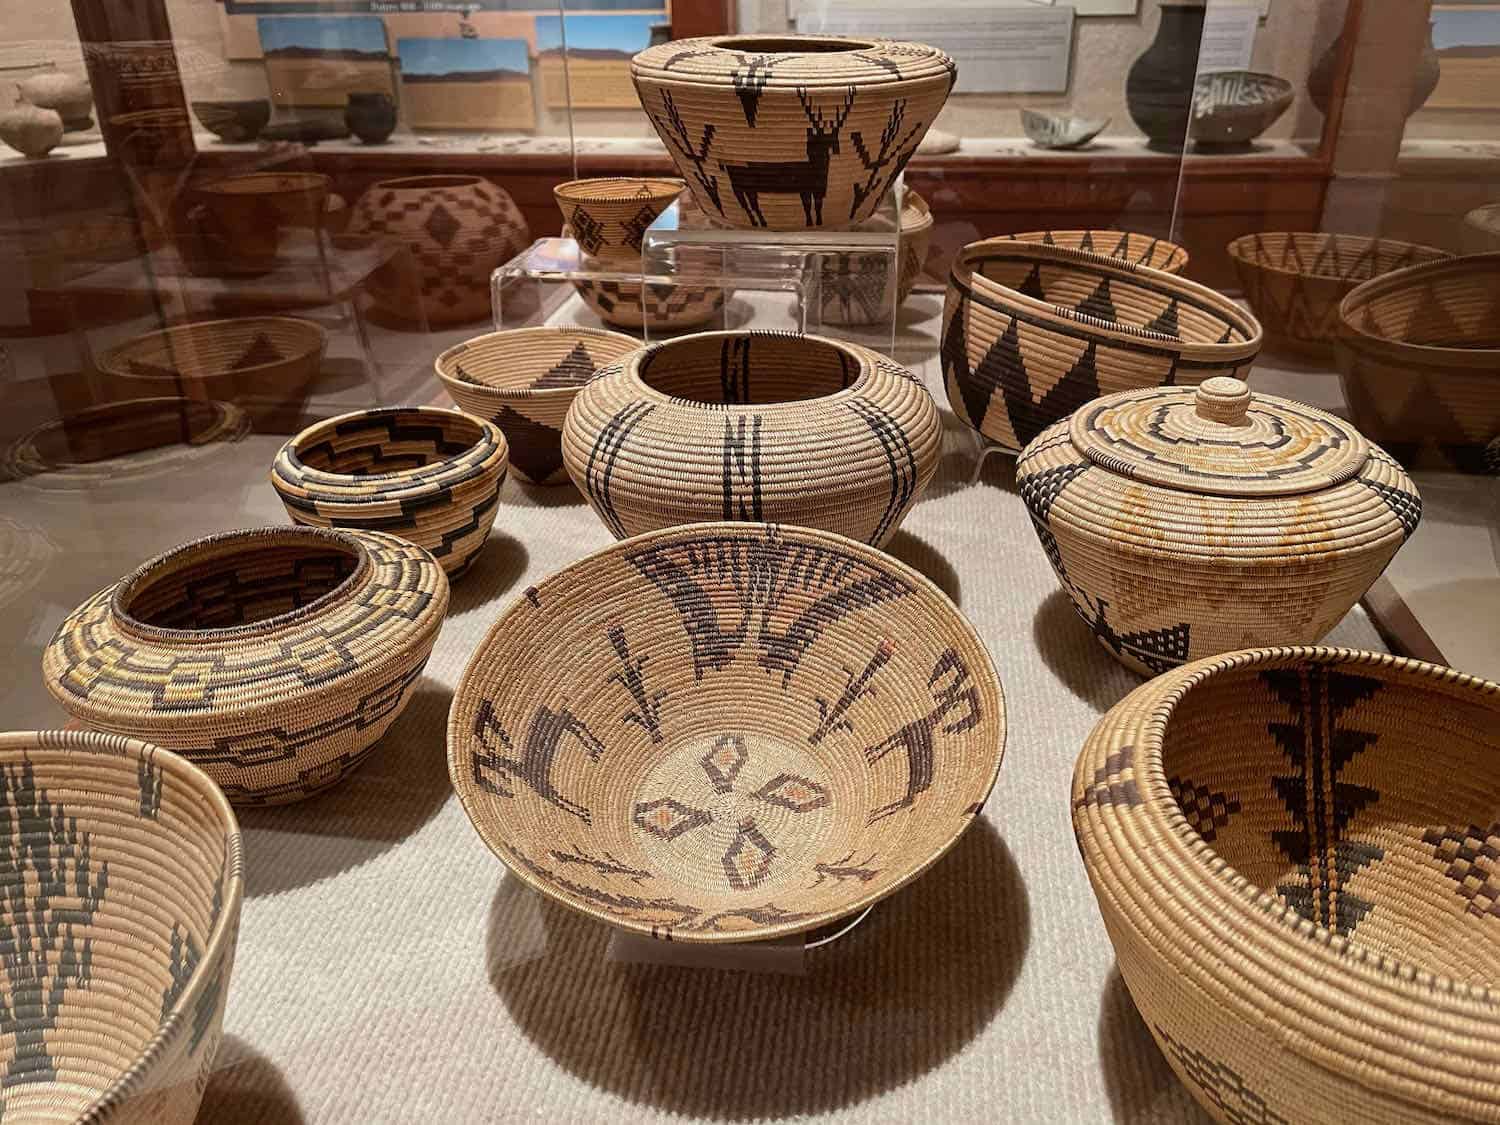 Display of Native American baskets at Lost City Museum.